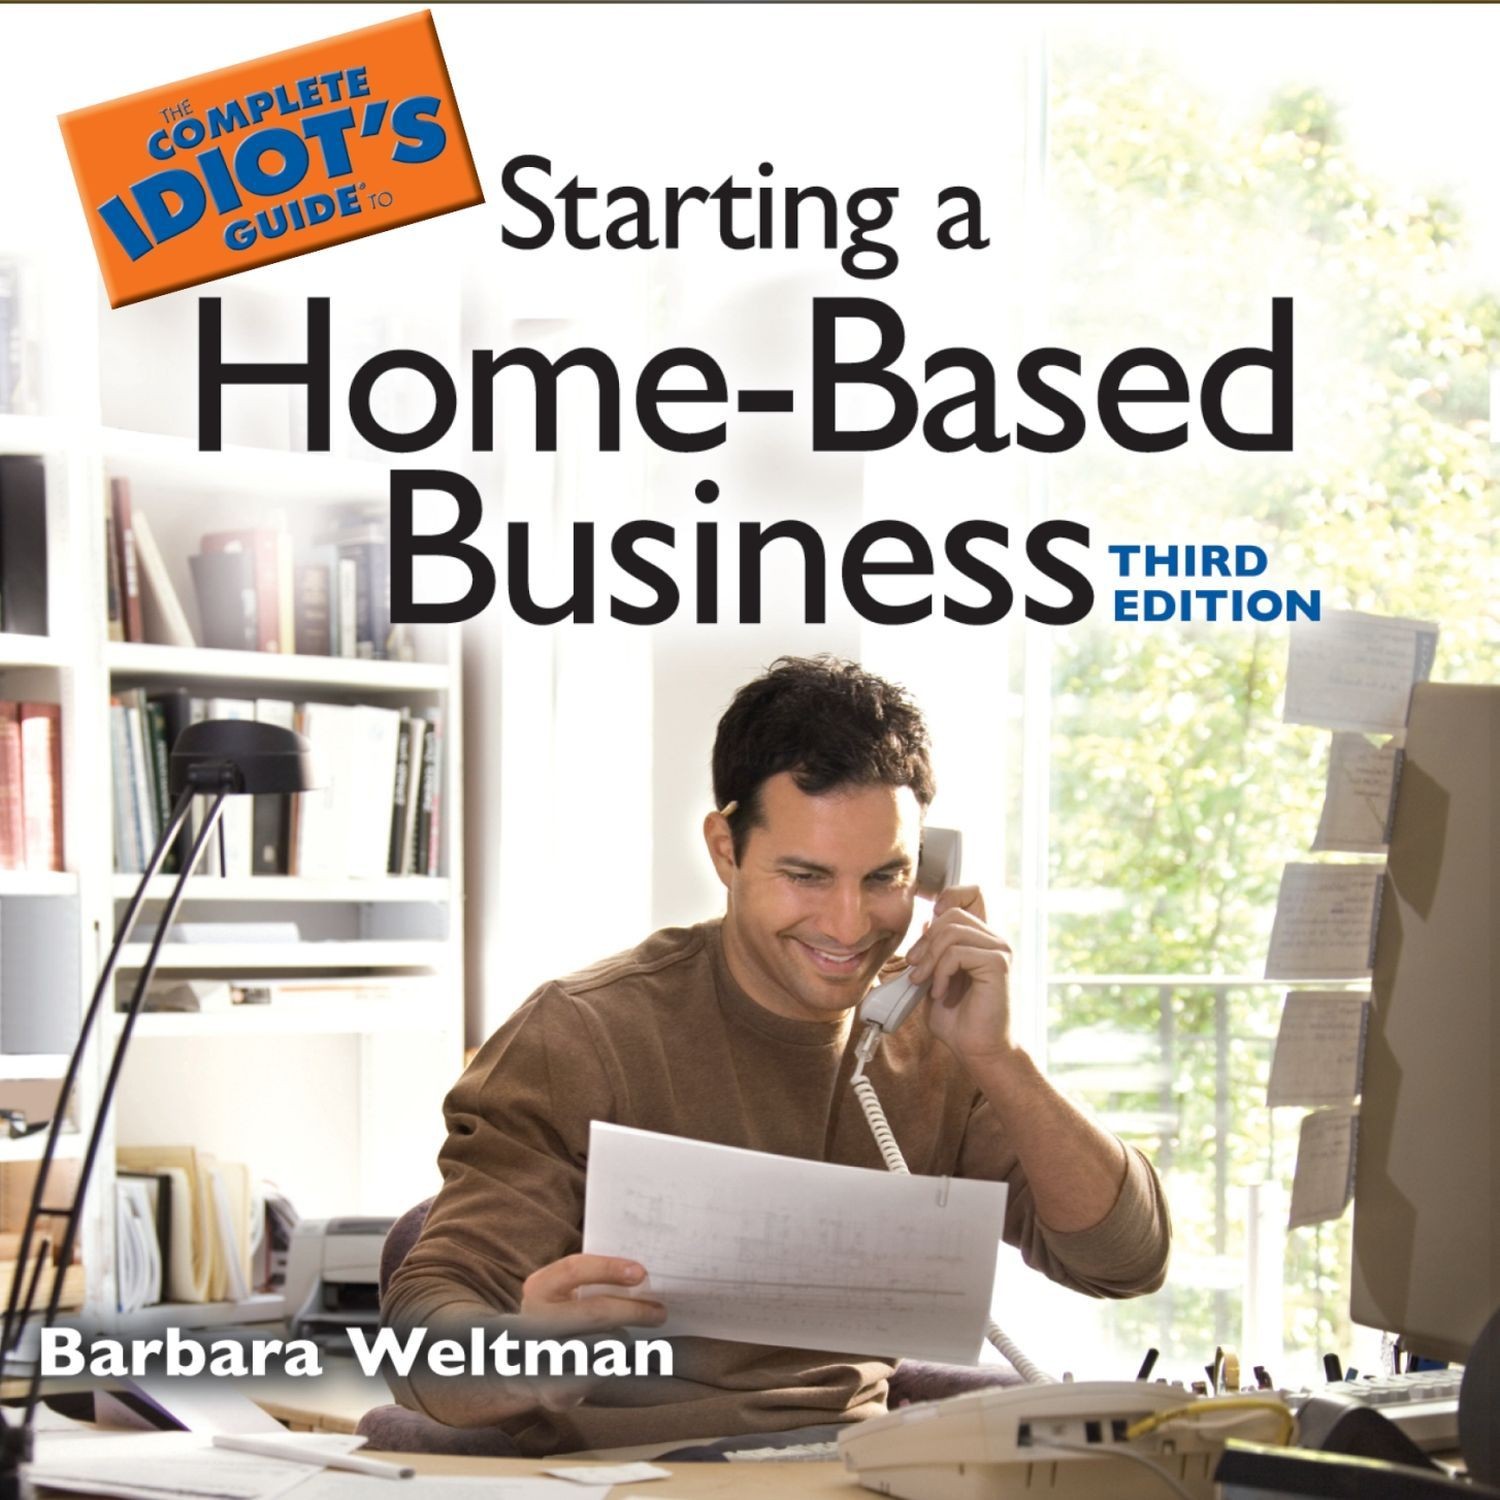 The Complete Idiot’s Guide to Starting a Home-Based Business (Abridged) Audiobook, by Barbara Weltman